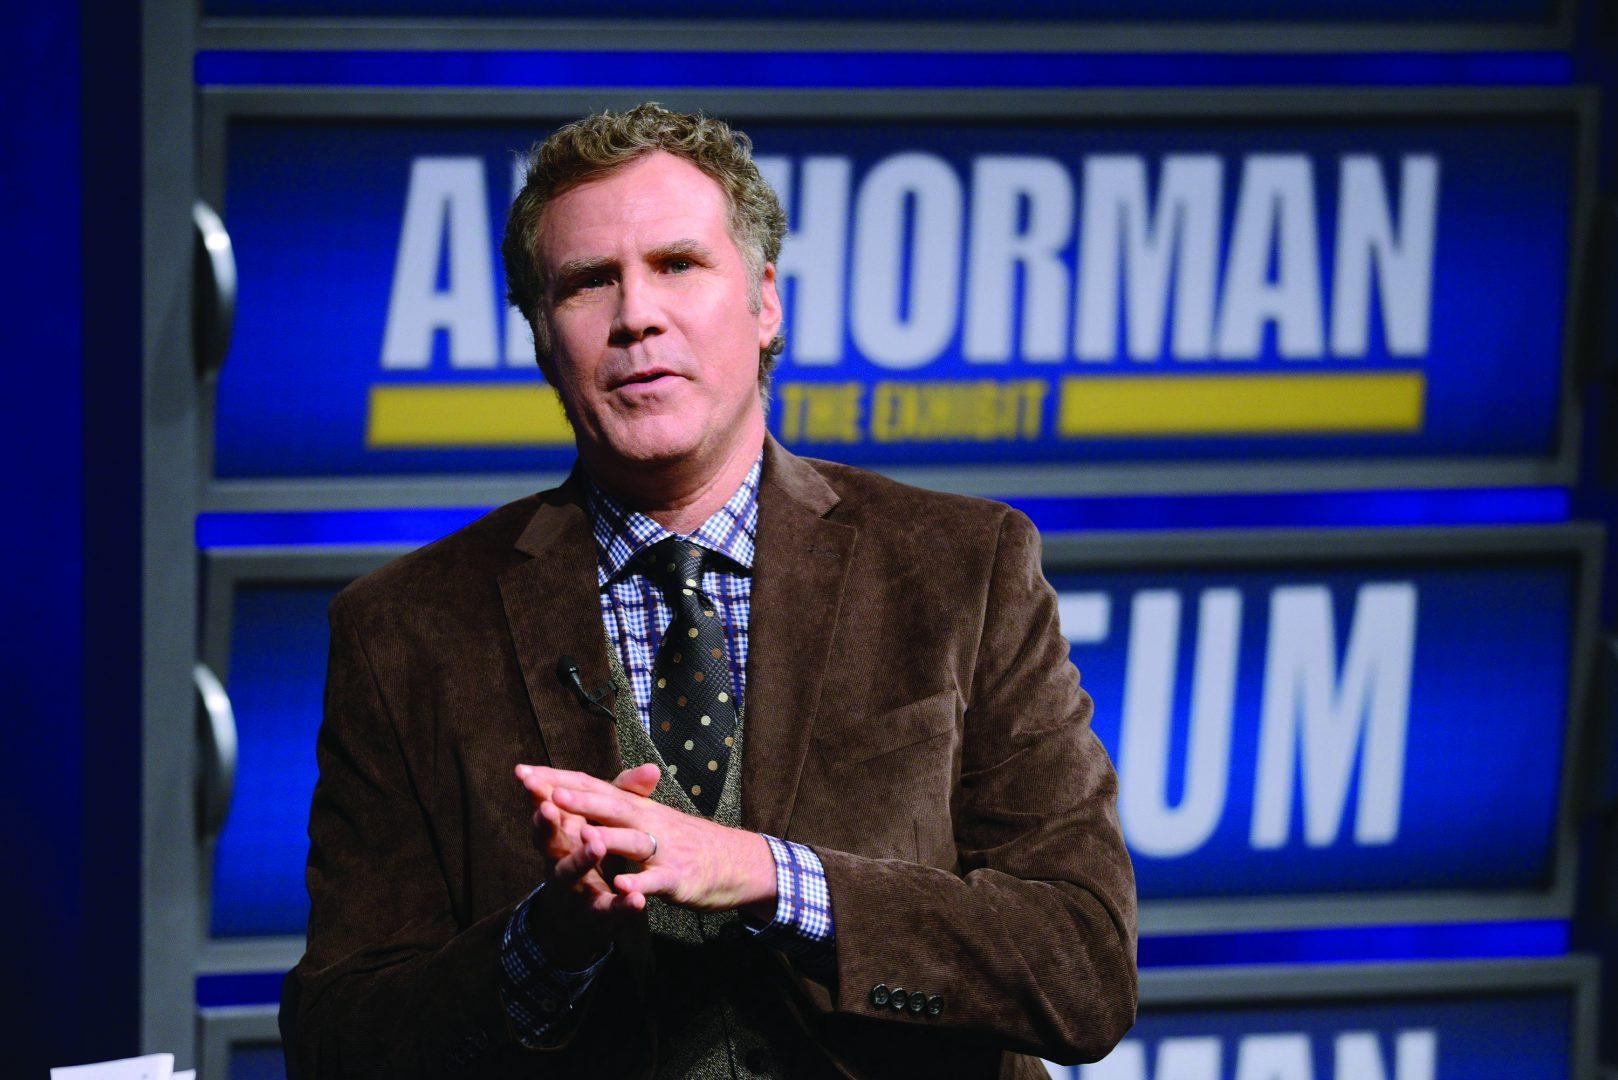 Actor+Will+Ferrell+discusses+his+new+movie%2C+%26quot%3BAnchorman+2%3A+The+Legend+Continues%2C%26quot%3B+at+the+Newseum+in+Washington+on+Tuesday%2C+Dec.+3%2C+2013.+%28Olivier+Douliery%2FAbaca+Press%2FTNS%29